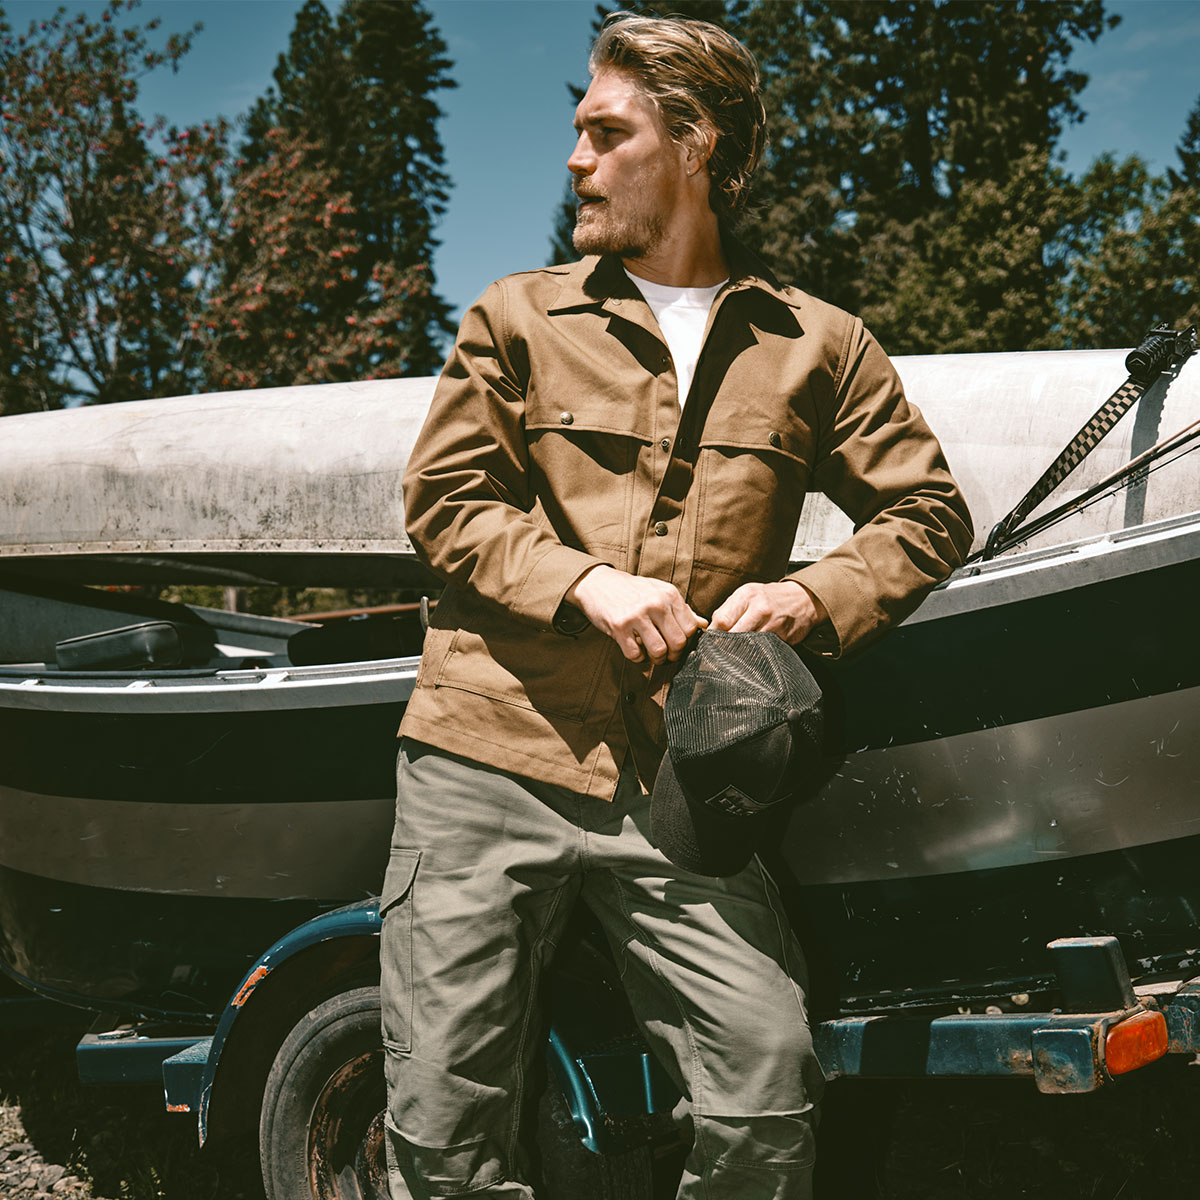 Filson Dry Tin Cloth Cruiser Gray Khaki, Historic, proven protection from wind, abrasion, and brambles